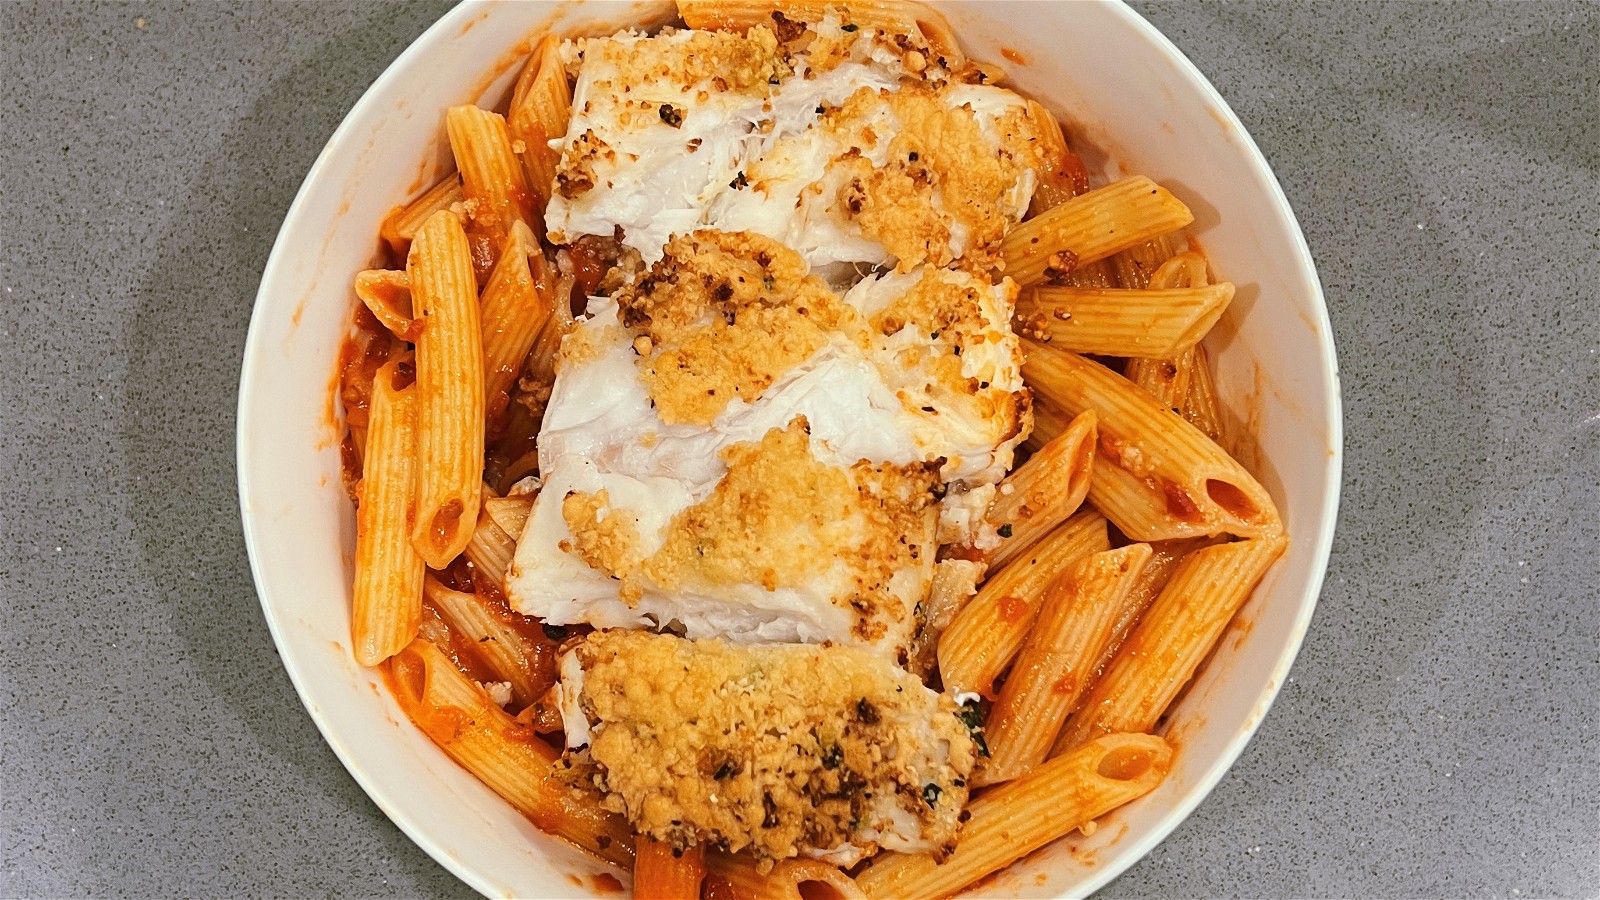 Image of Parmesan Crusted Halibut with Penne